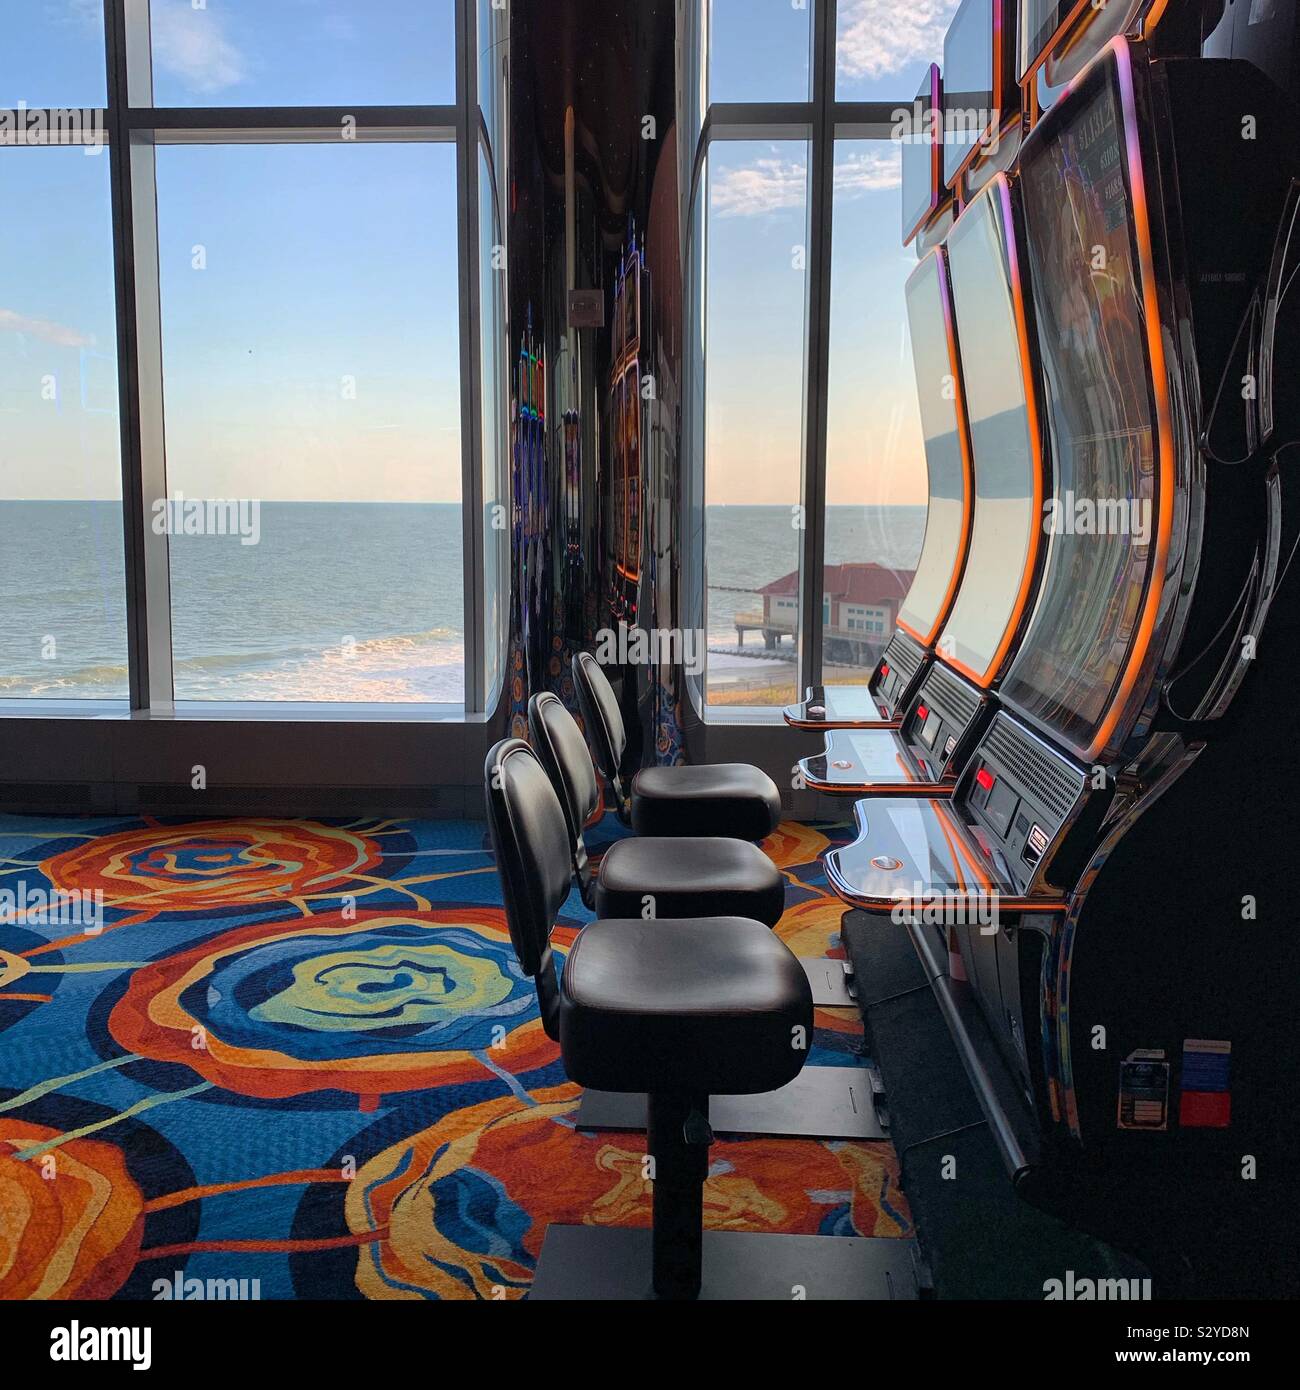 Slot machines with an ocean view, Ocean Resort Casino, New Jersey, United States Stock Photo